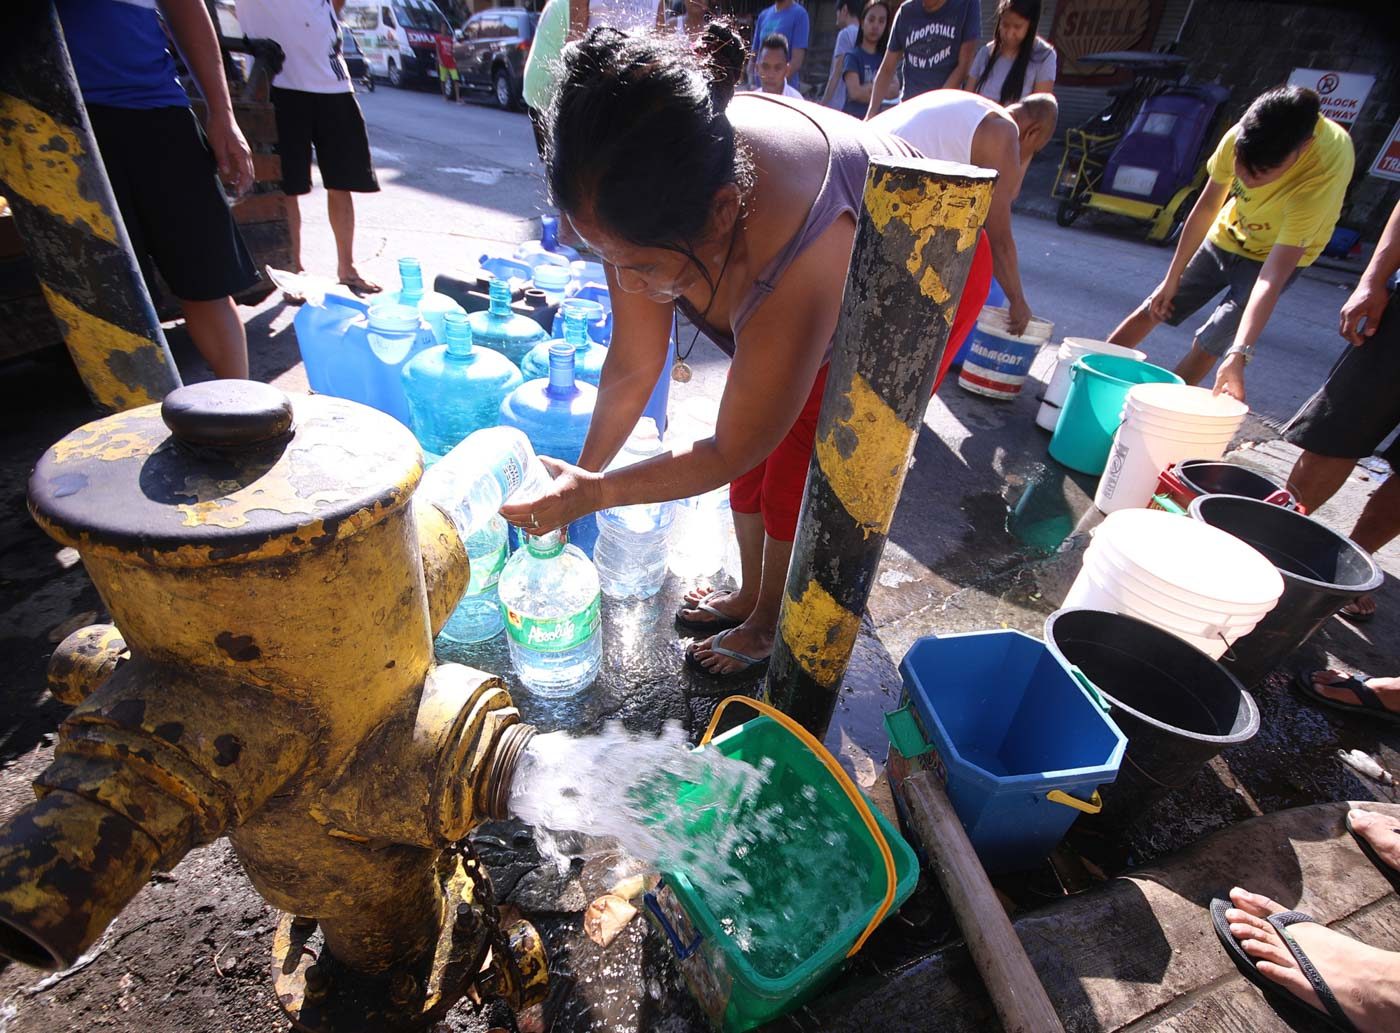 WATER WOES. Residents of Barangay Highway Hills in Mandaluyong City on March 10, 2019, fetch potable water from a water hydrant after experiencing low water pressure or no water supply due to operational adjustments to address the continuous decline in La Mesa Dam's water level. Photo by Darren Langit/Rappler   